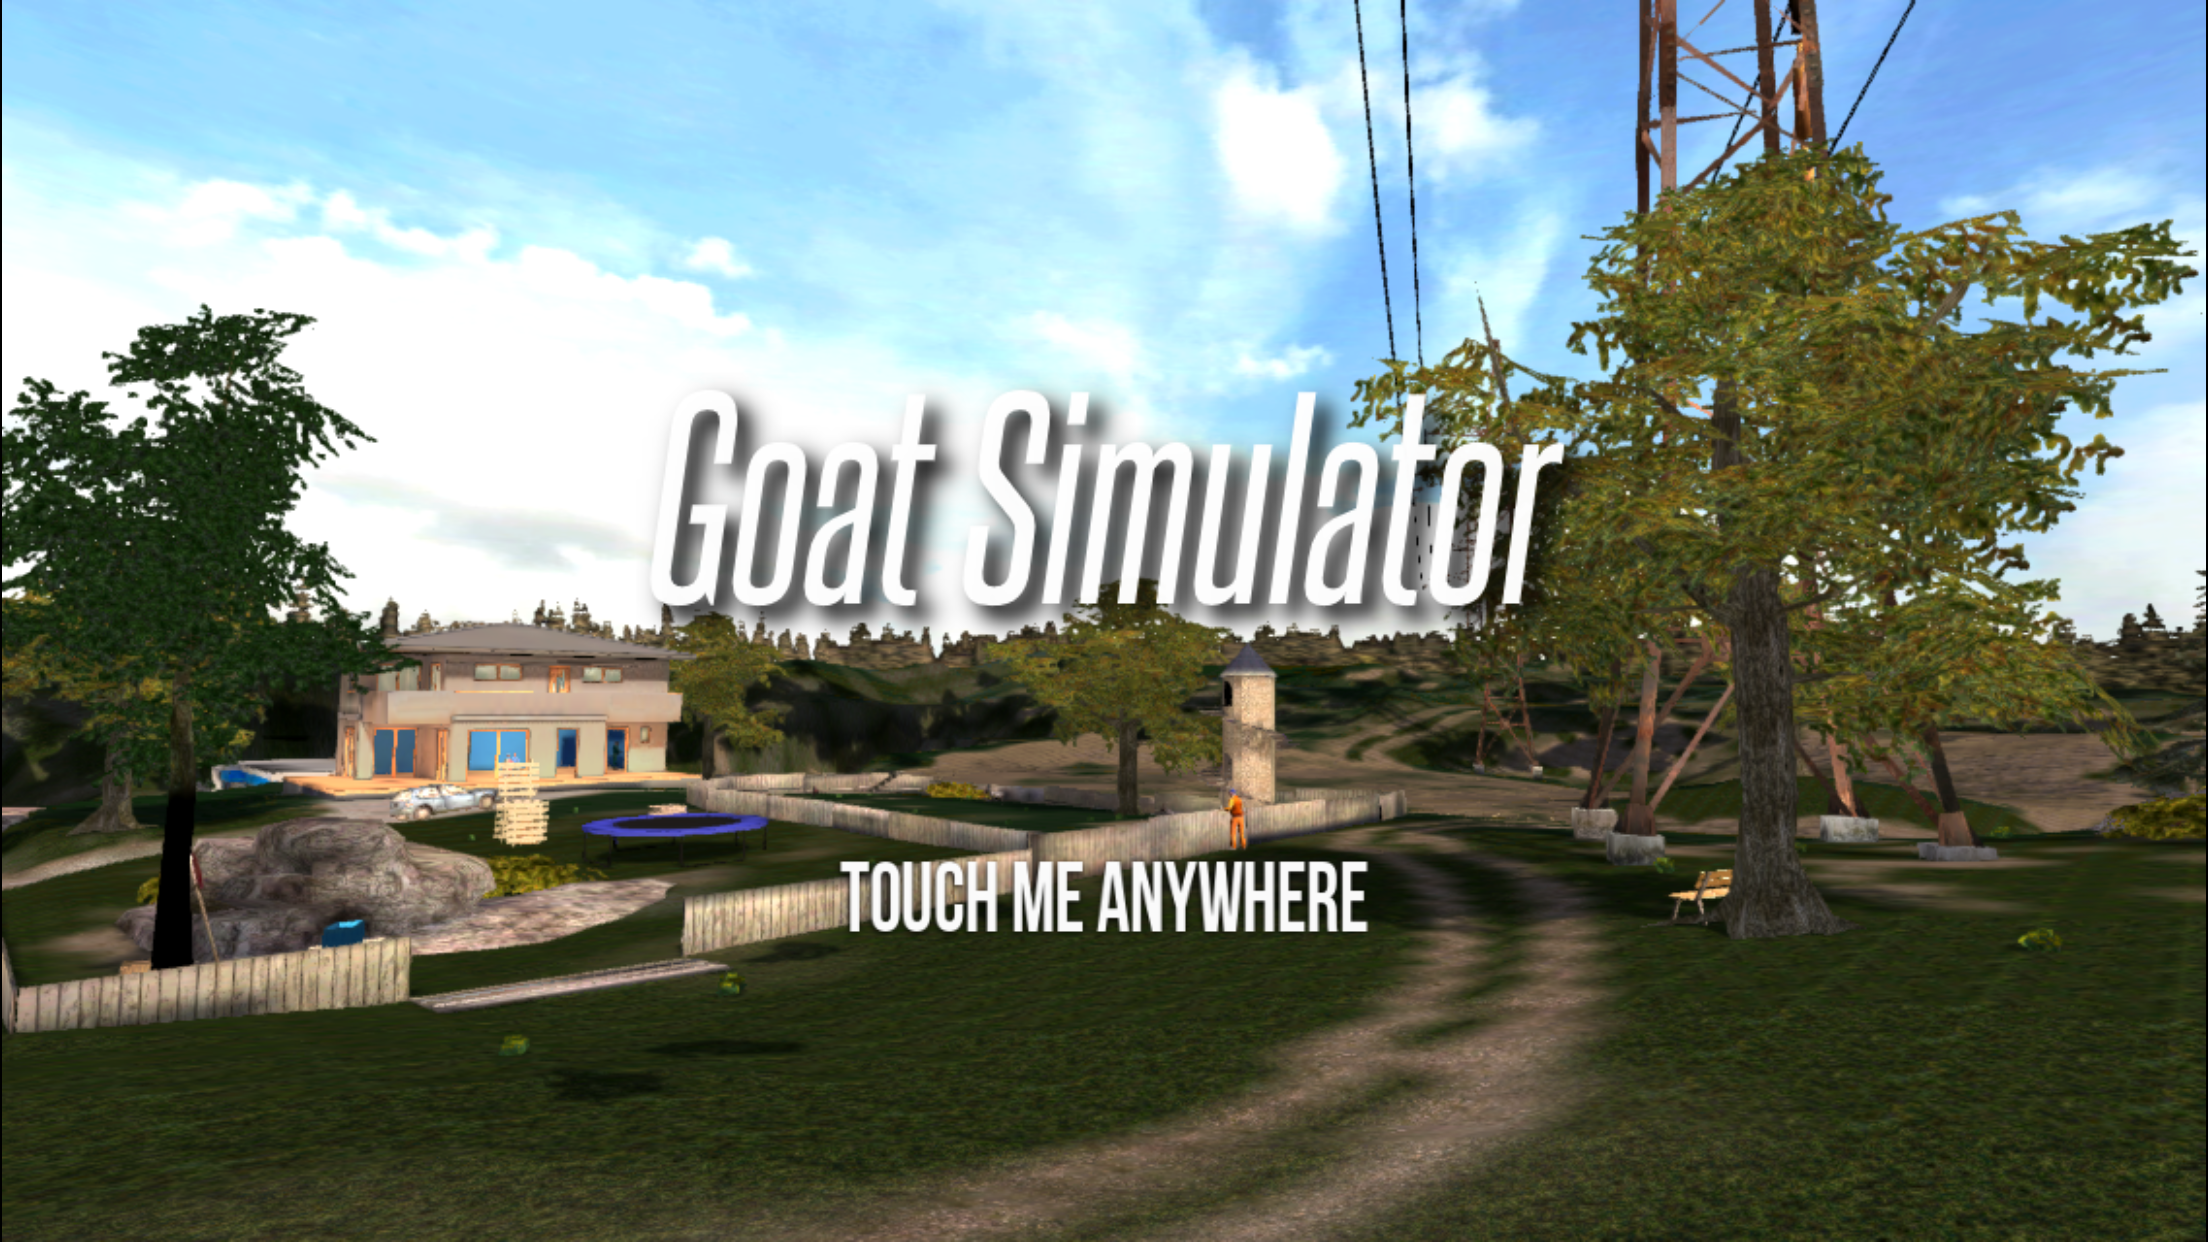 Goat Simulator Review Iphone 6 Plus Funny Quirky Never Boring Video Tablet News